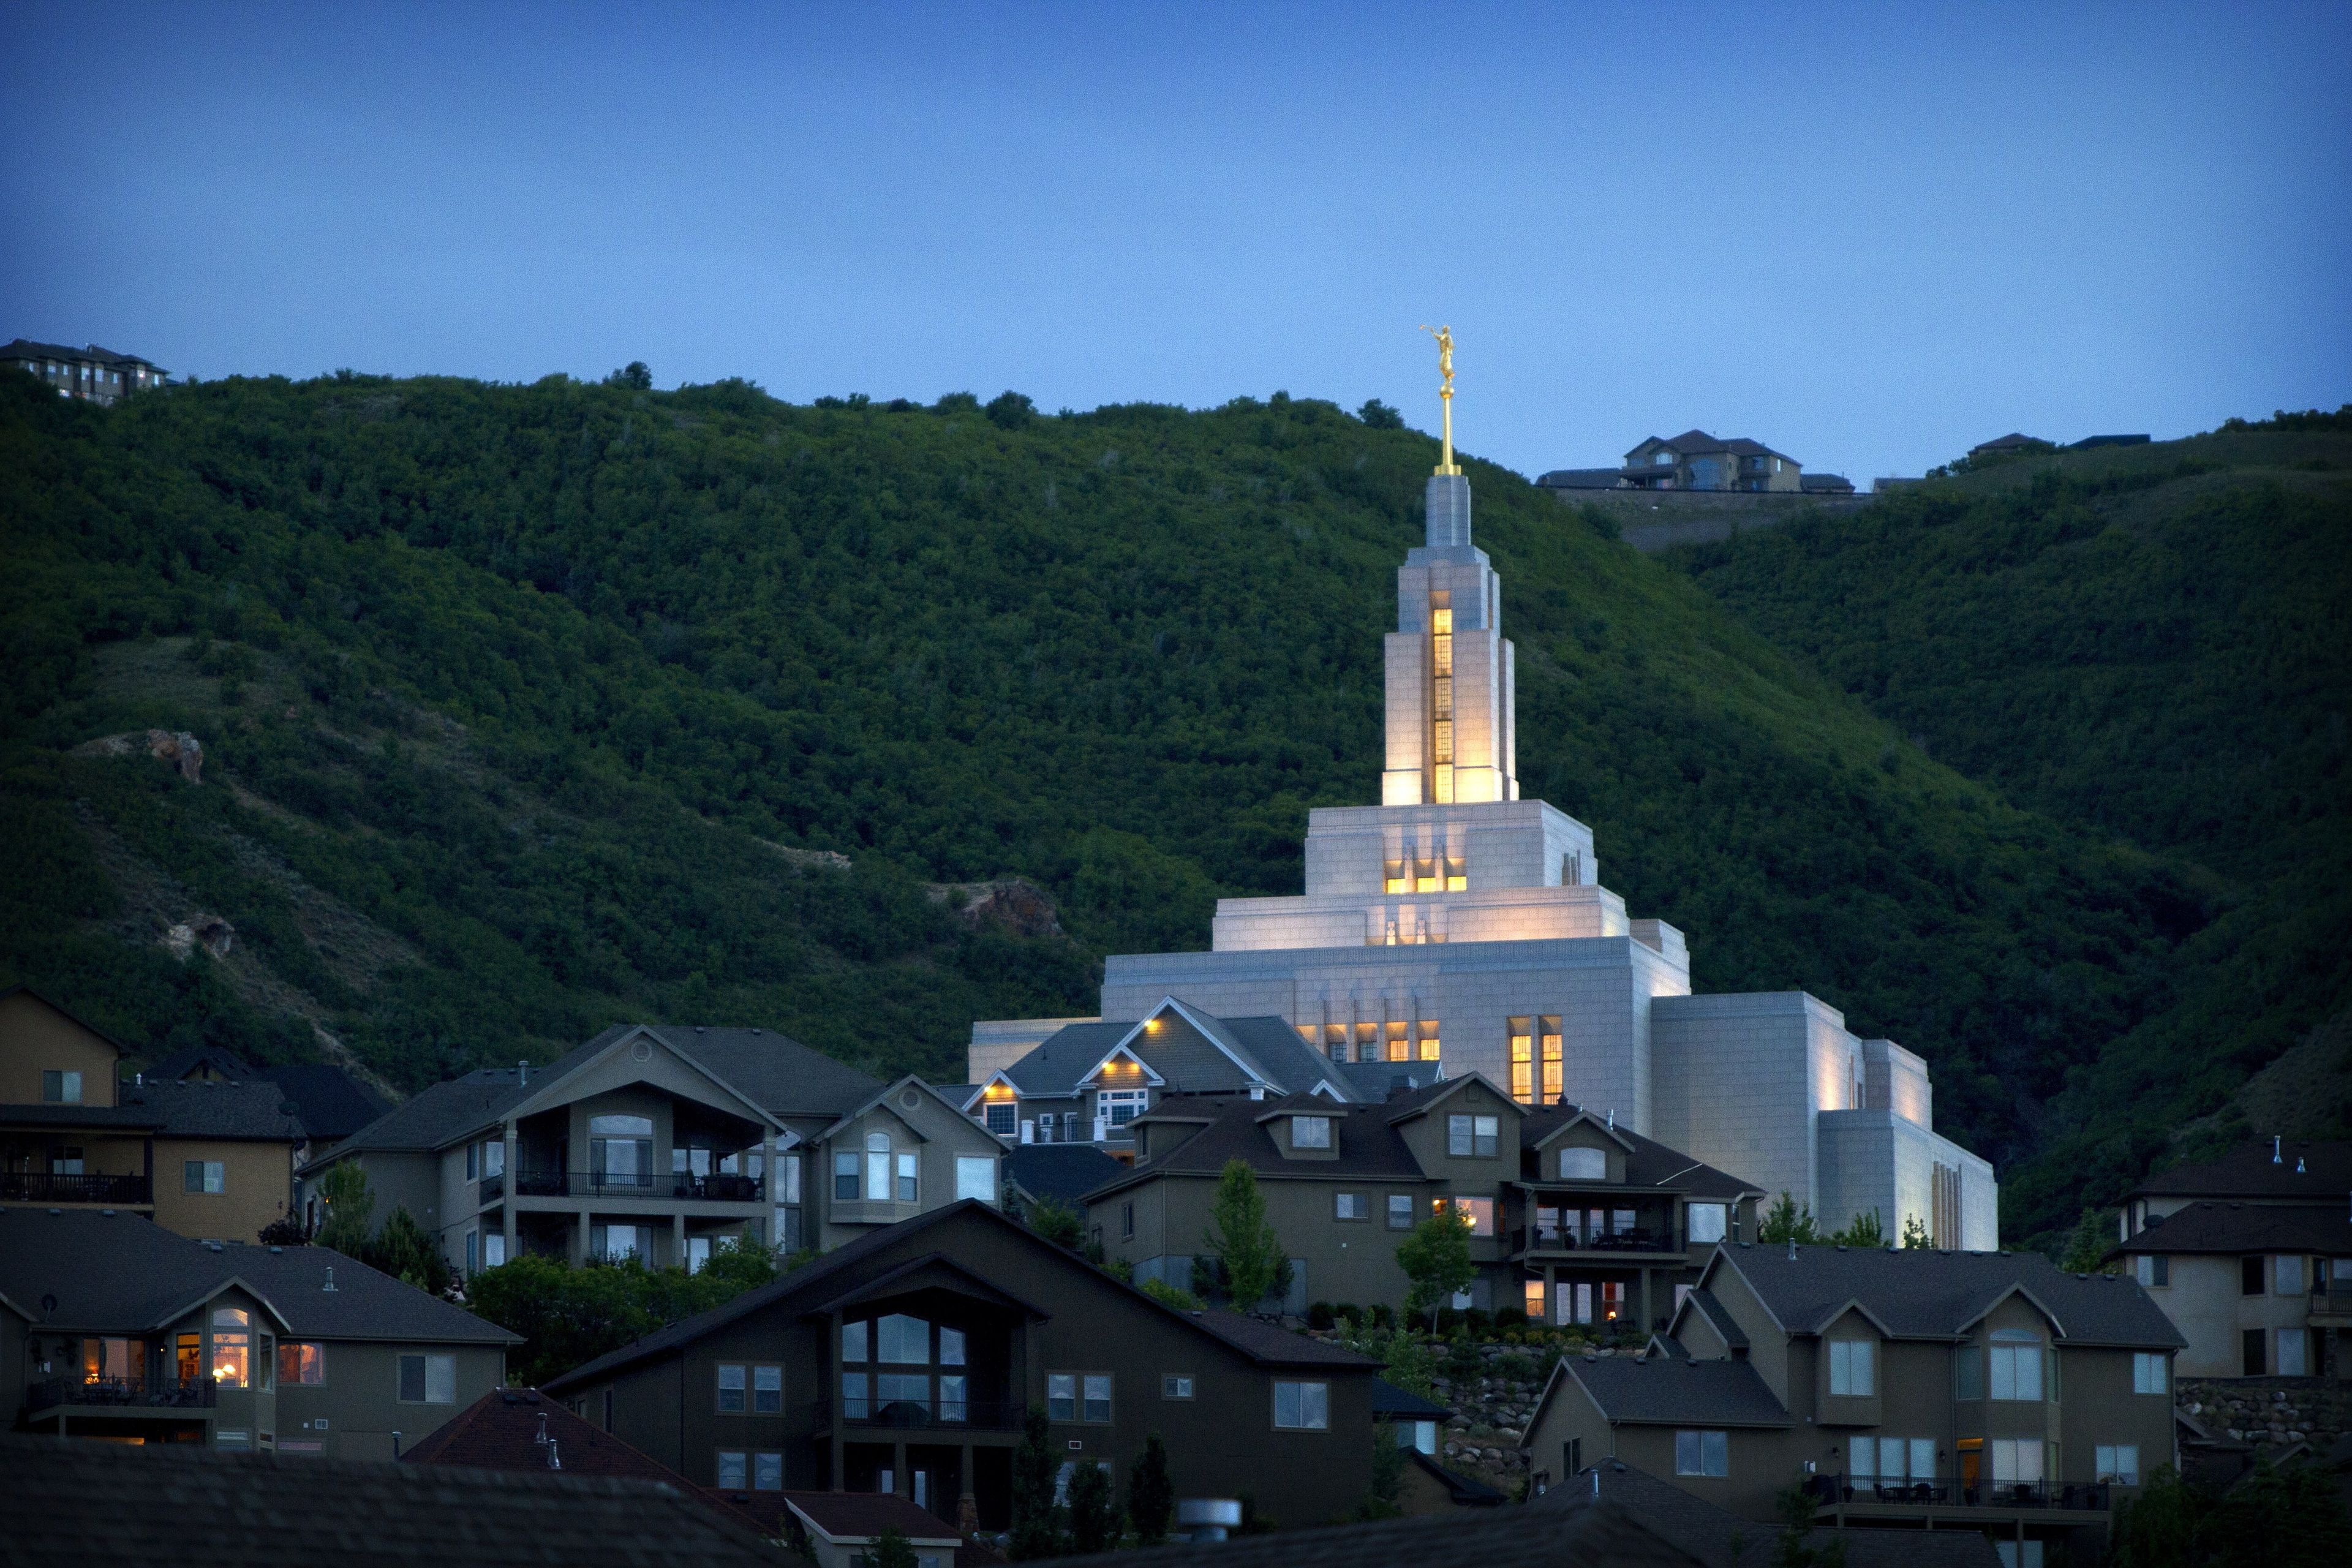 A view of the Draper Utah Temple from the nearby neighborhood at night.